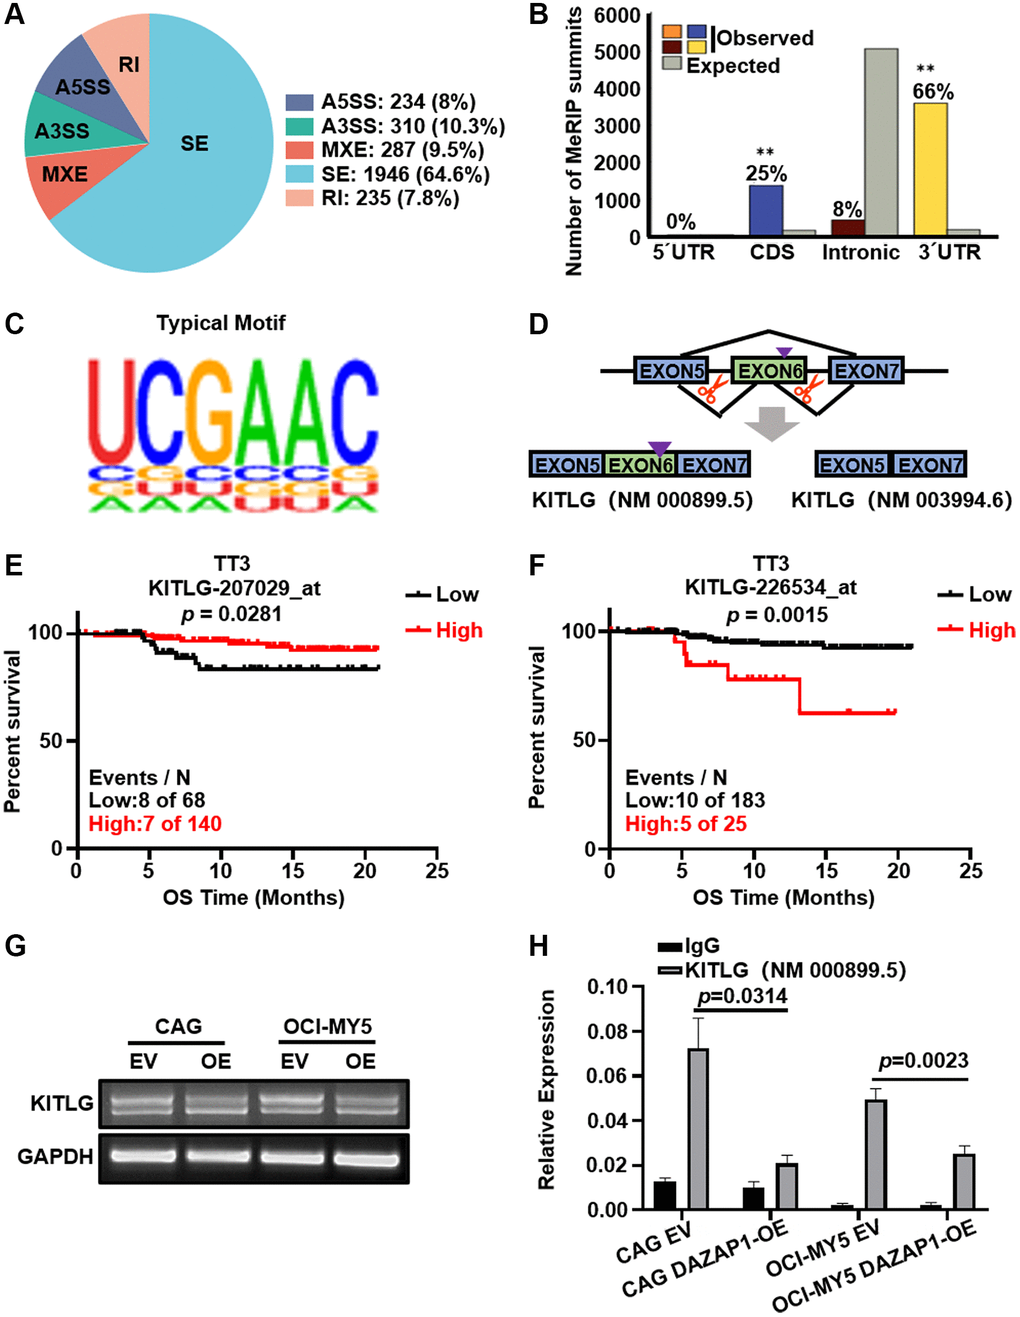 DAZAP1 triggers alternative splicing of KITLG mRNA in MM cells. (A) AS events were classified into five categories: skipped exon (SE), alternative 5′ splice site (A5SS), alternative 3′ splice site (A3SS), mutually exclusive exon (MXE), and retained intron (RI). (B) Binding of DAZAP1 was close to the 3′ splice site. (C) The typical motif on the peak-bound mRNA regions. (D) Schematic diagrams showed the alternative splicing of KITLG. (E and F) Two different probes of KITLG corresponded to different patient survivals in TT3 cohort. (G and H) RNA levels of different isoform of KITLG were tested by PCR and qPCR assays.